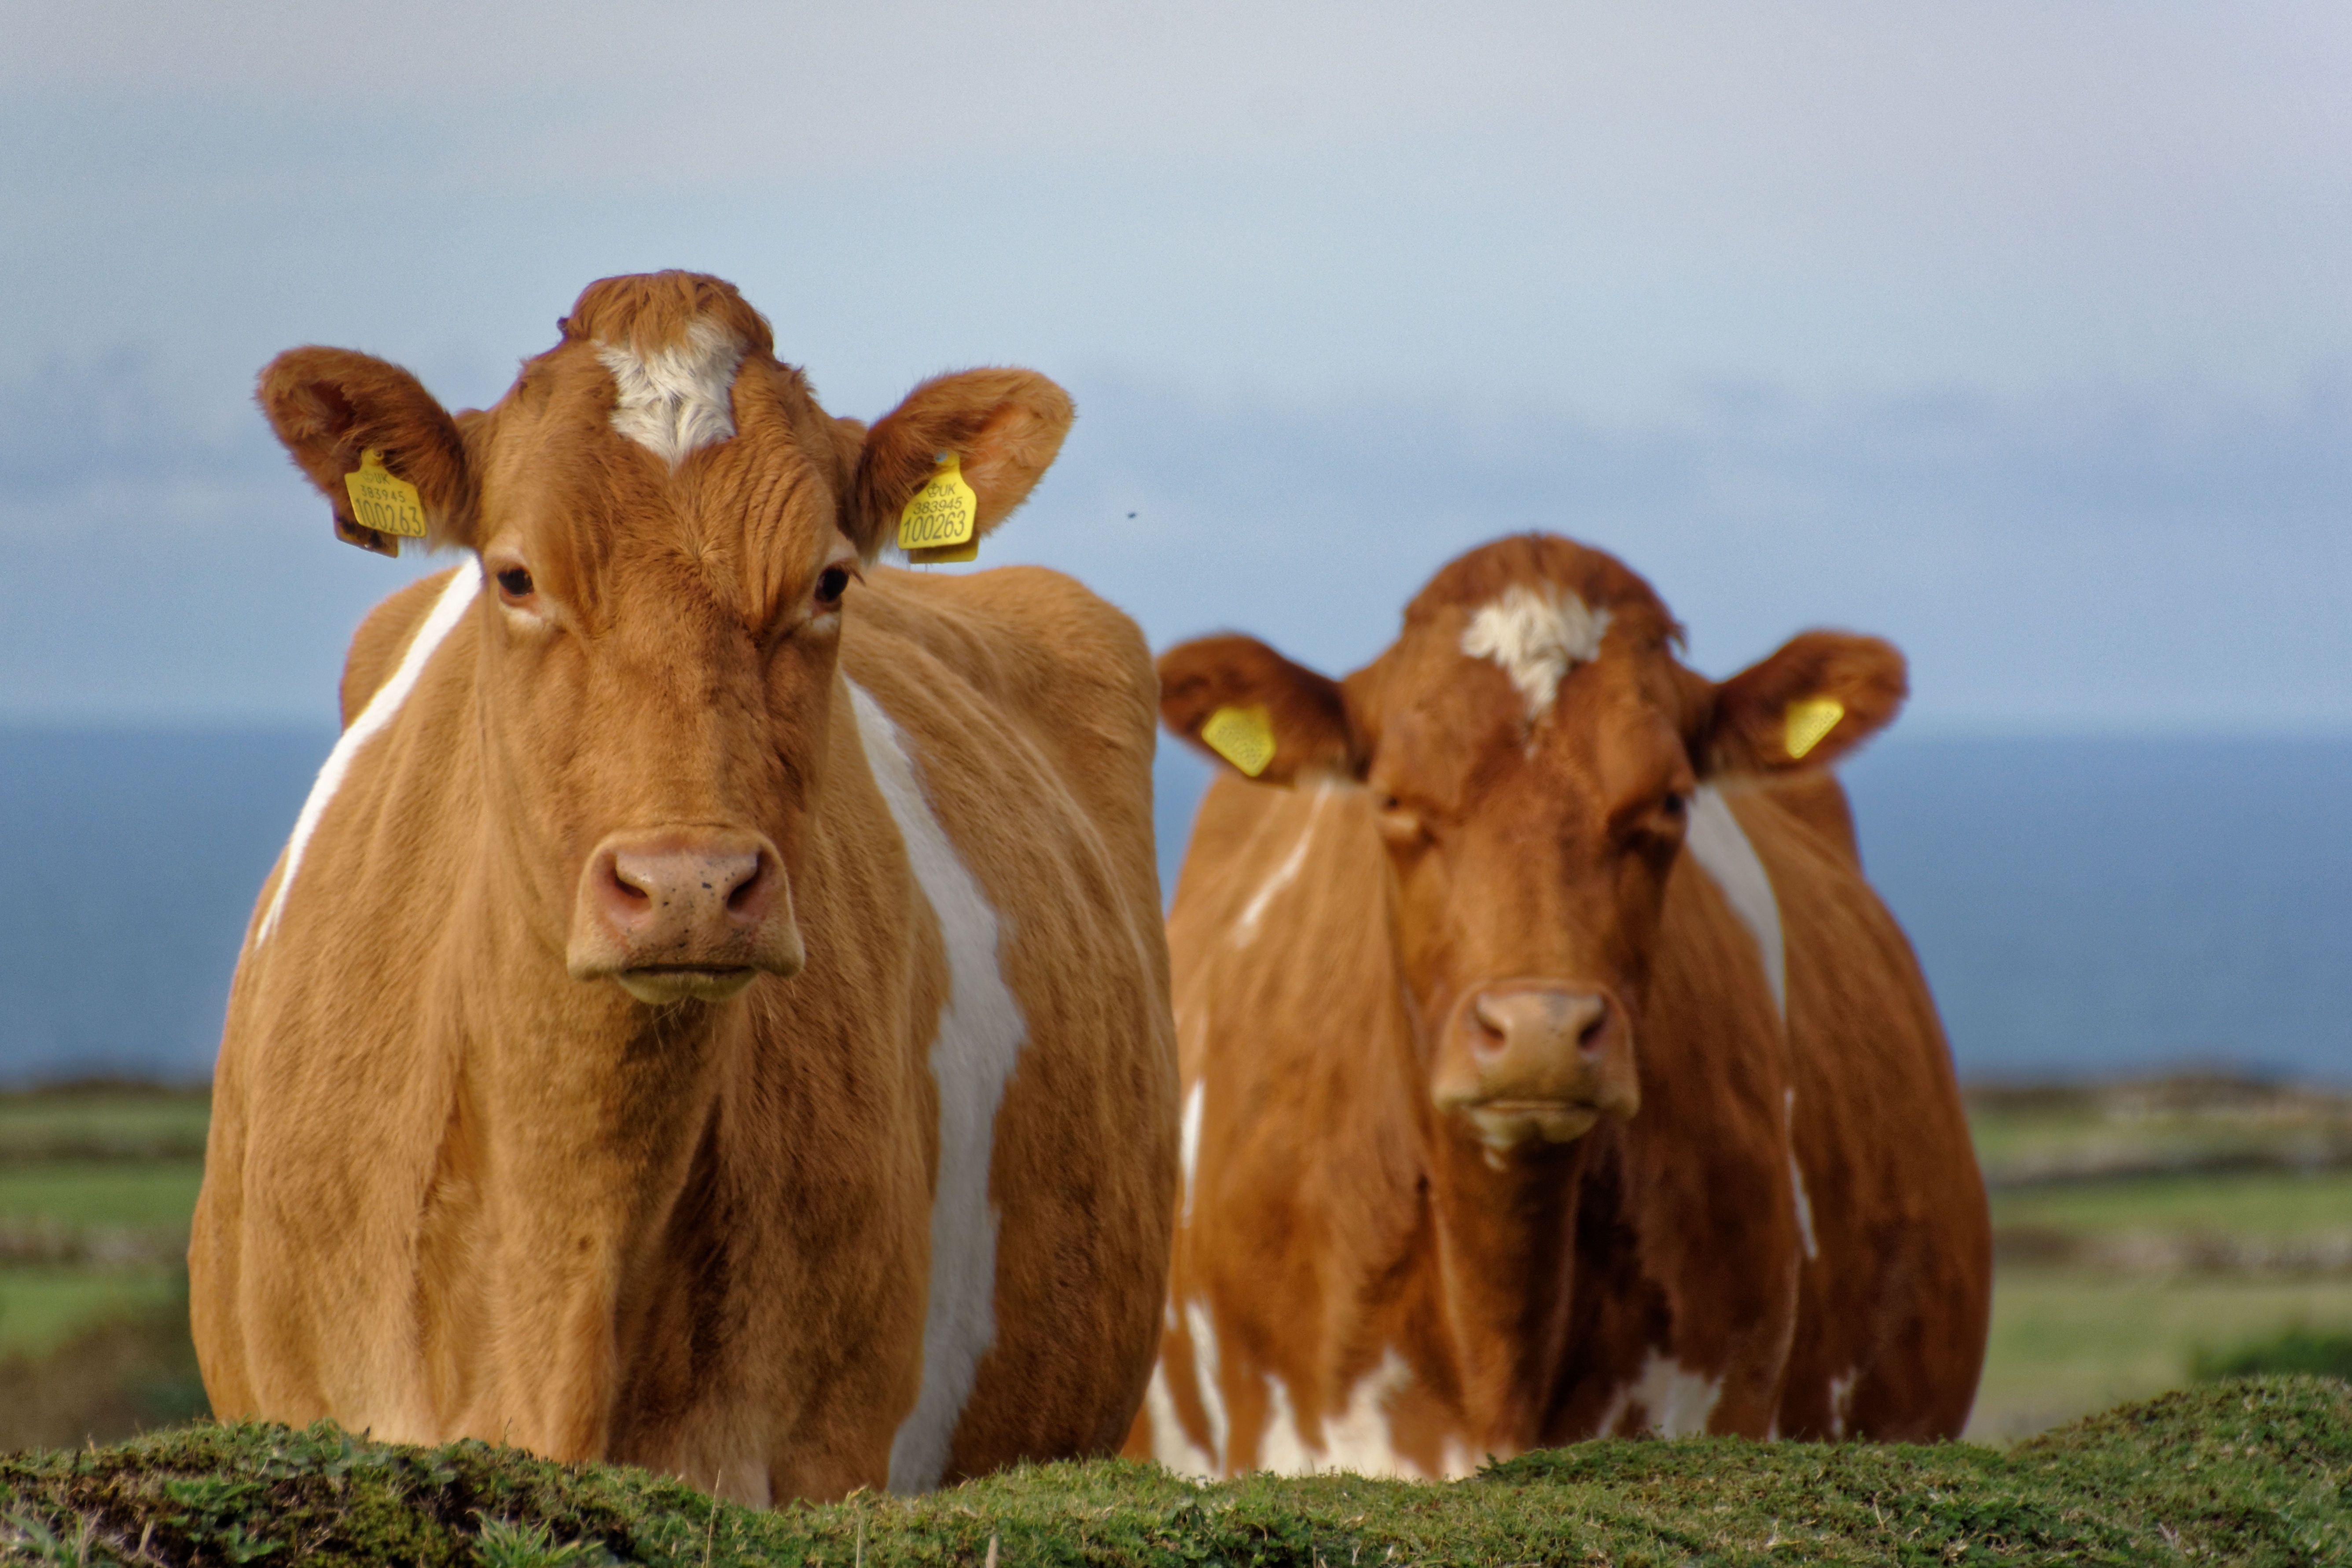 2 brown-and-white cows